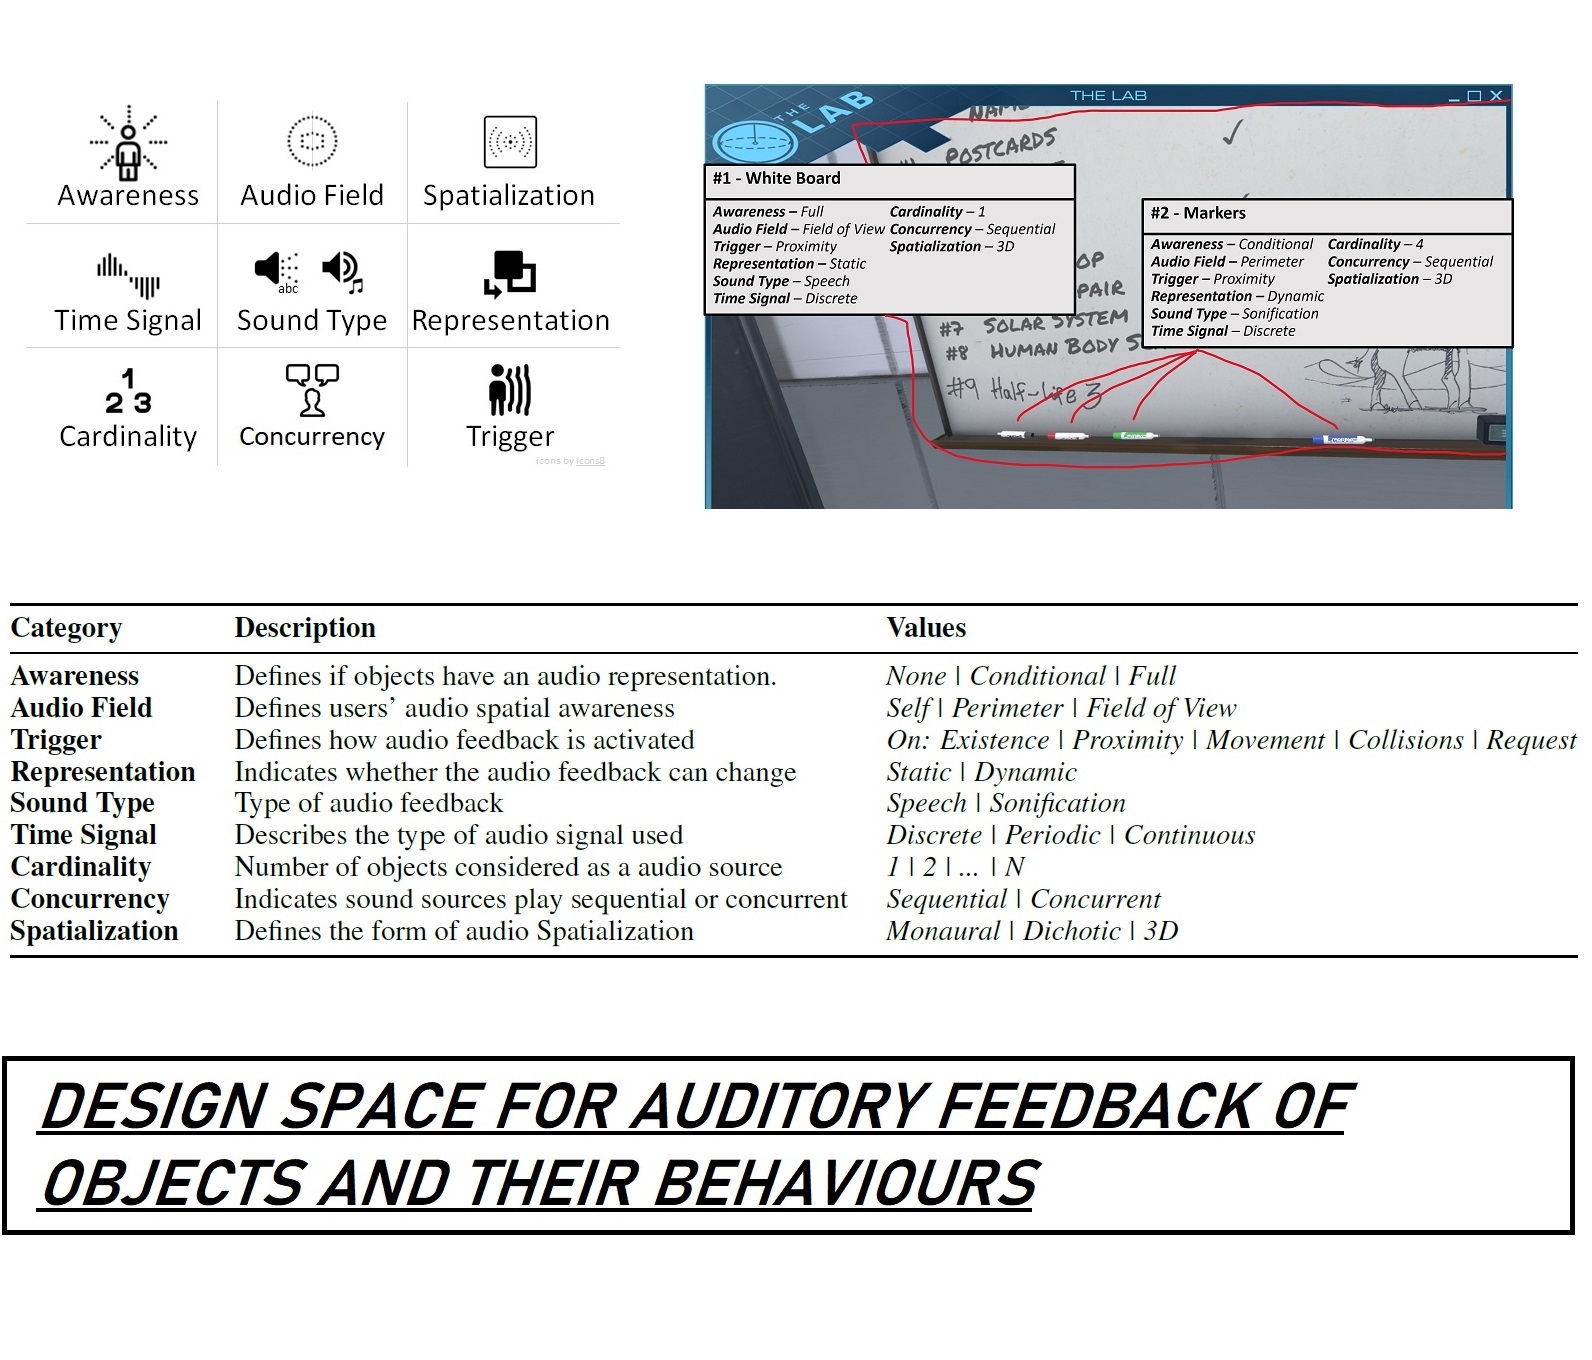 The image presents the 9 categories of the design space: Awareness, Audio Field, Spatialization, time signsal, sound type, representation, cardinality, concurrency, and trigger. It is followed by one figure and one table that are presented in the paper and that try to better showcase the meaning of such categories